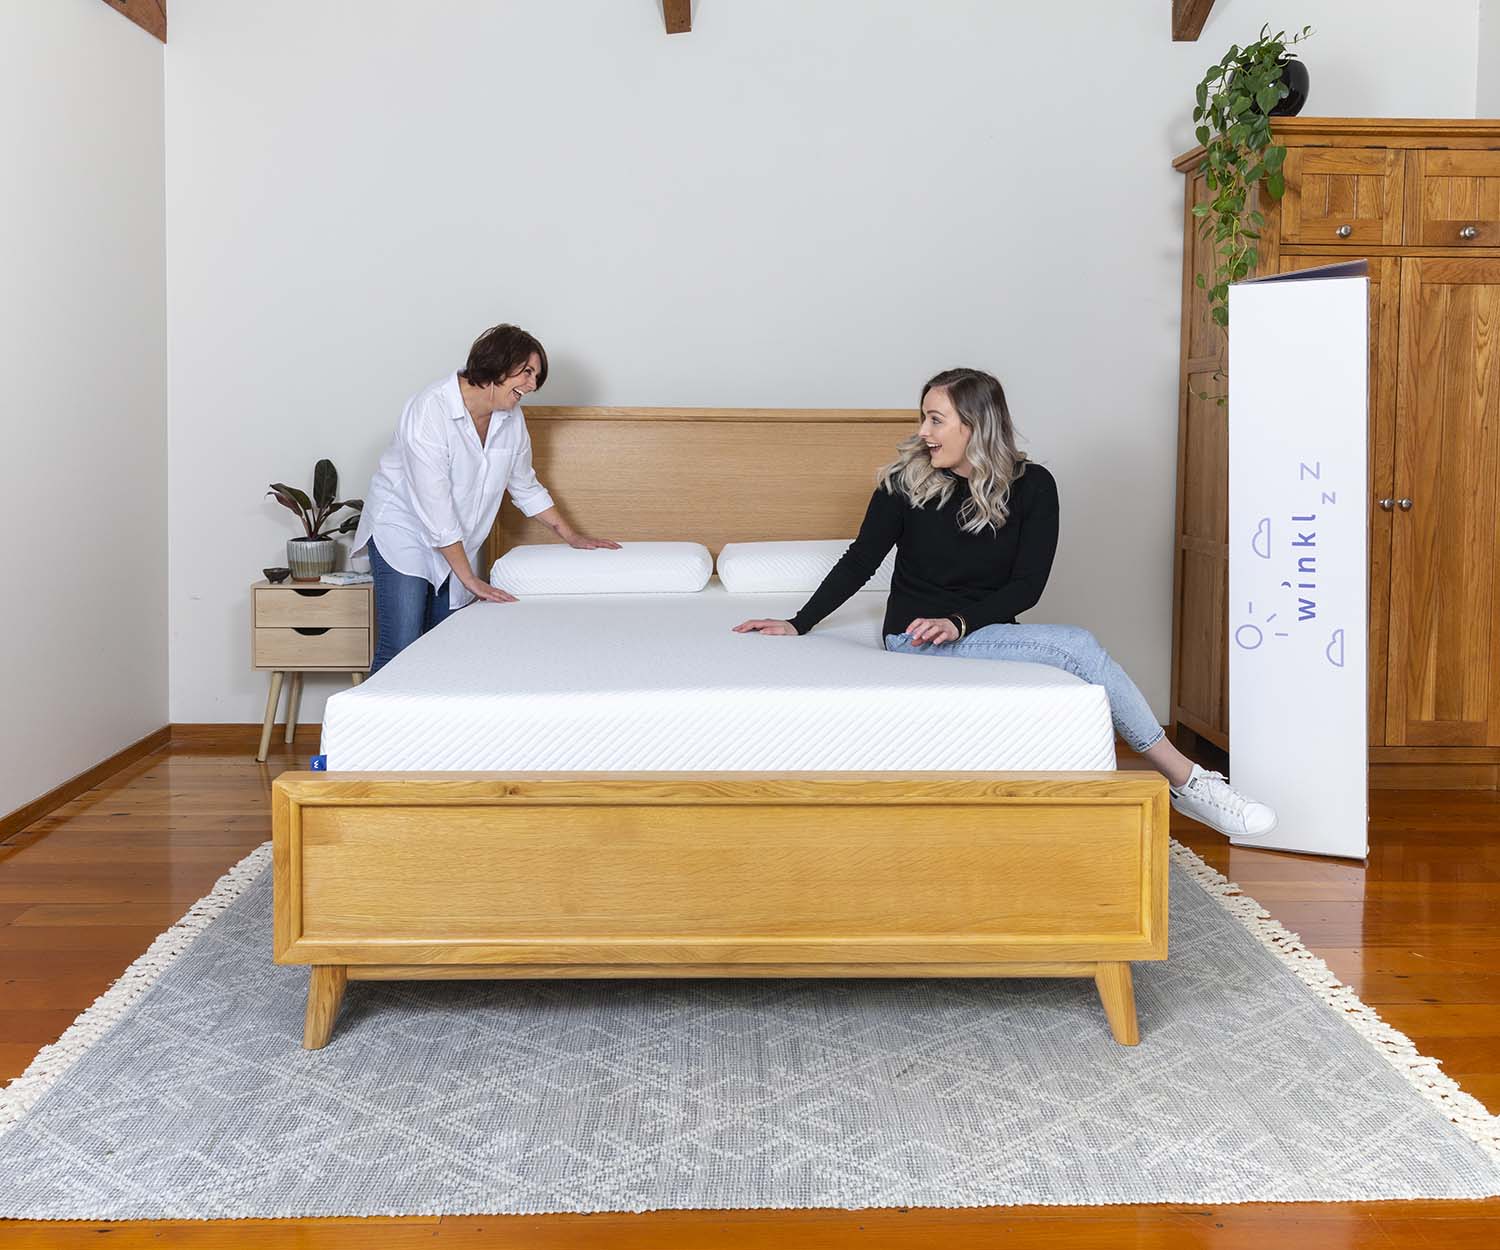 Taking sleep to the next level: The new Kiwi bed-in-a-box mattress company that’s delivering NZers better sleep